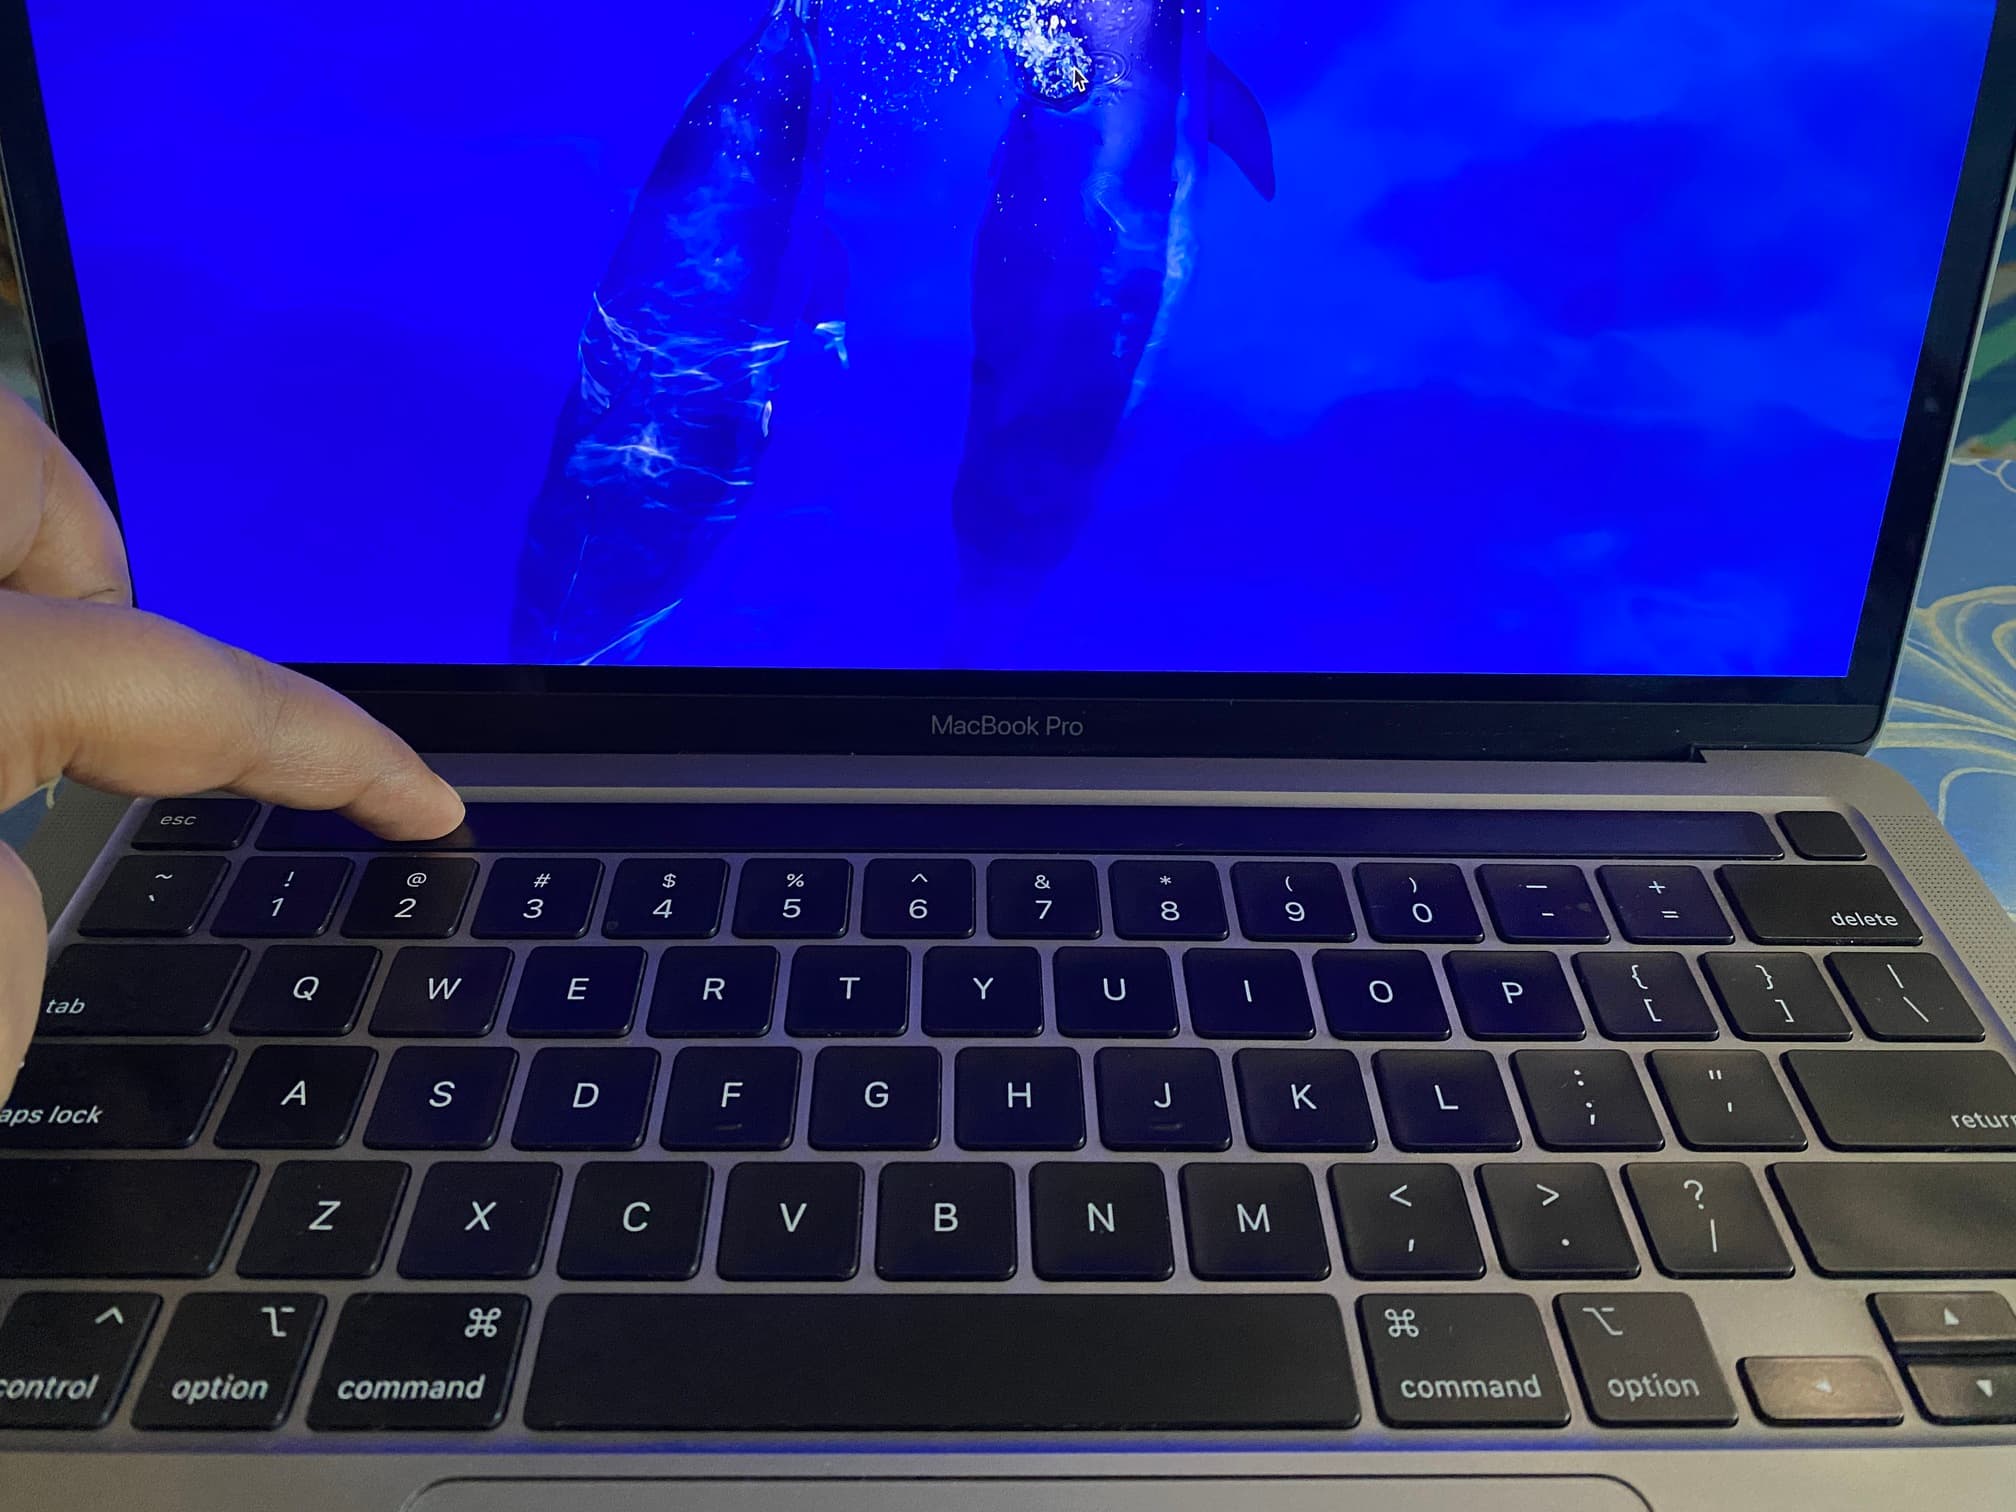 How to completely disable the MacBook Pro Touch Bar and make it unresponsive to touch